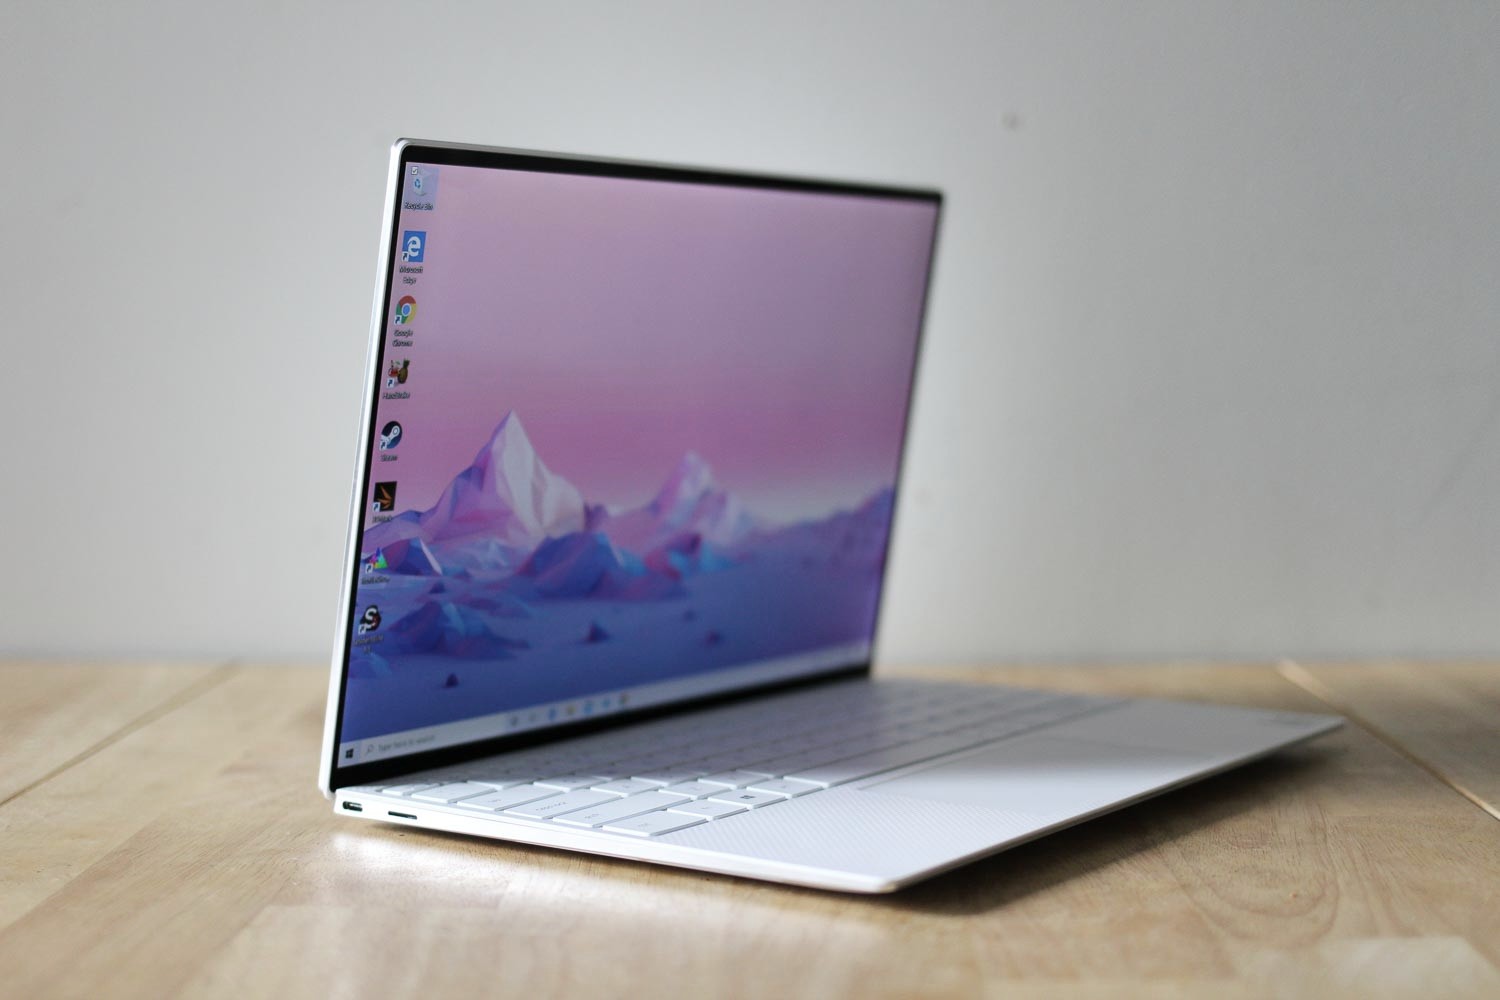 Dell XPS 13 (2020) review: A top-quality ultraportable gets even